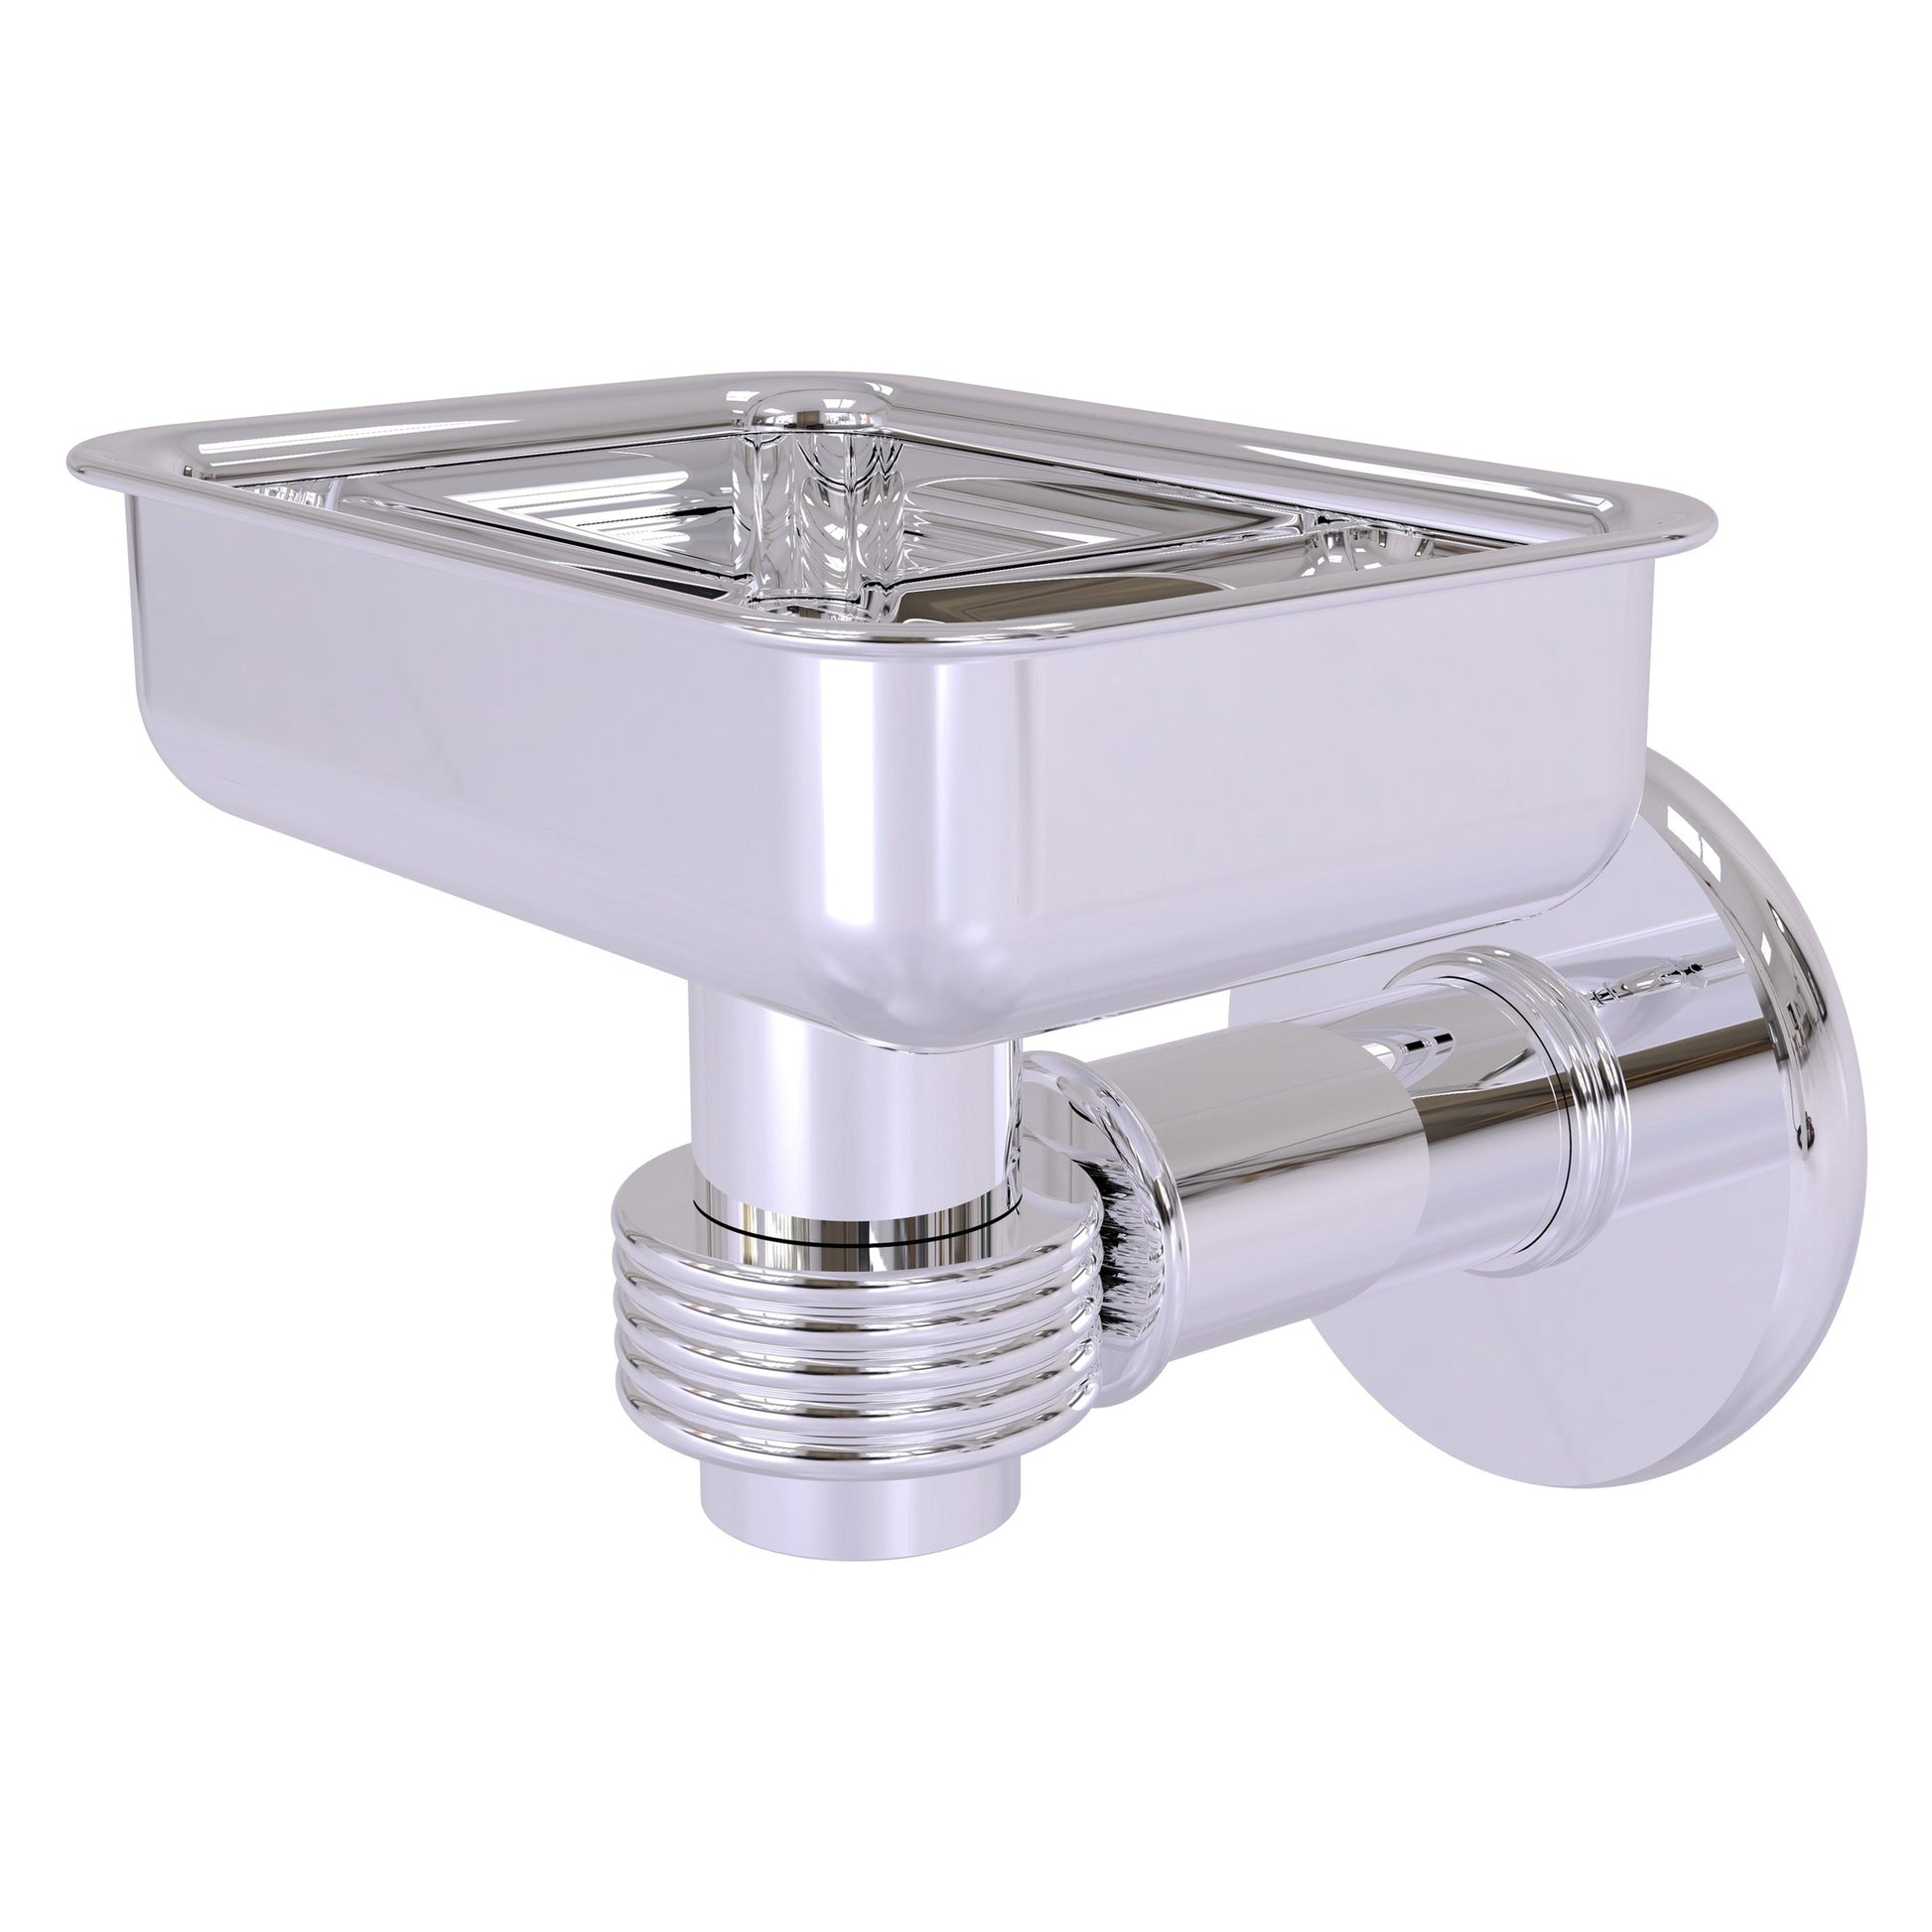 Allied Brass Continental 4.5" x 3.5" Polished Chrome Solid Brass Wall-Mounted Soap Dish Holder with Grooved Accents